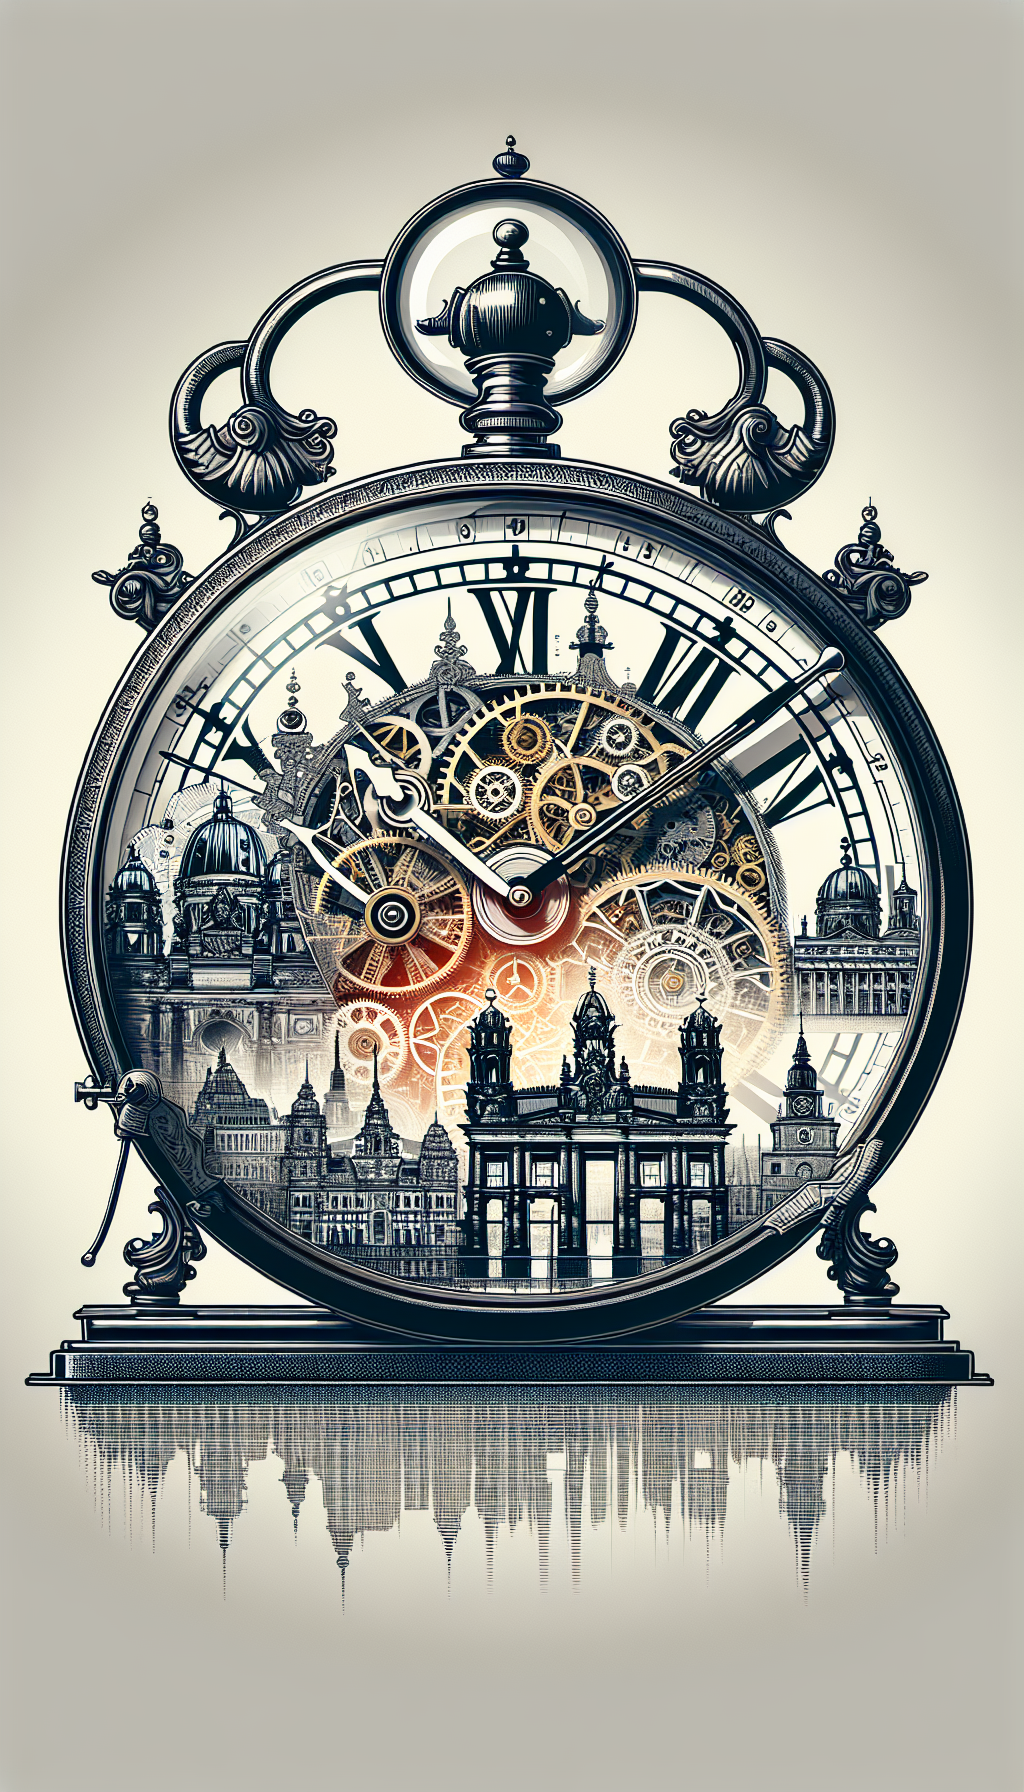 An illustration showcases a grand, ornate antique German wall clock, with its detailed gears magnified within its silhouette, blending into a scene of Berlin's historic skyline. Each clock number is replaced with unique emblematic German craftsmanship symbols, like the precision tools and awards, with a magnifying glass overlay on the lower half, hinting at the identification aspect.